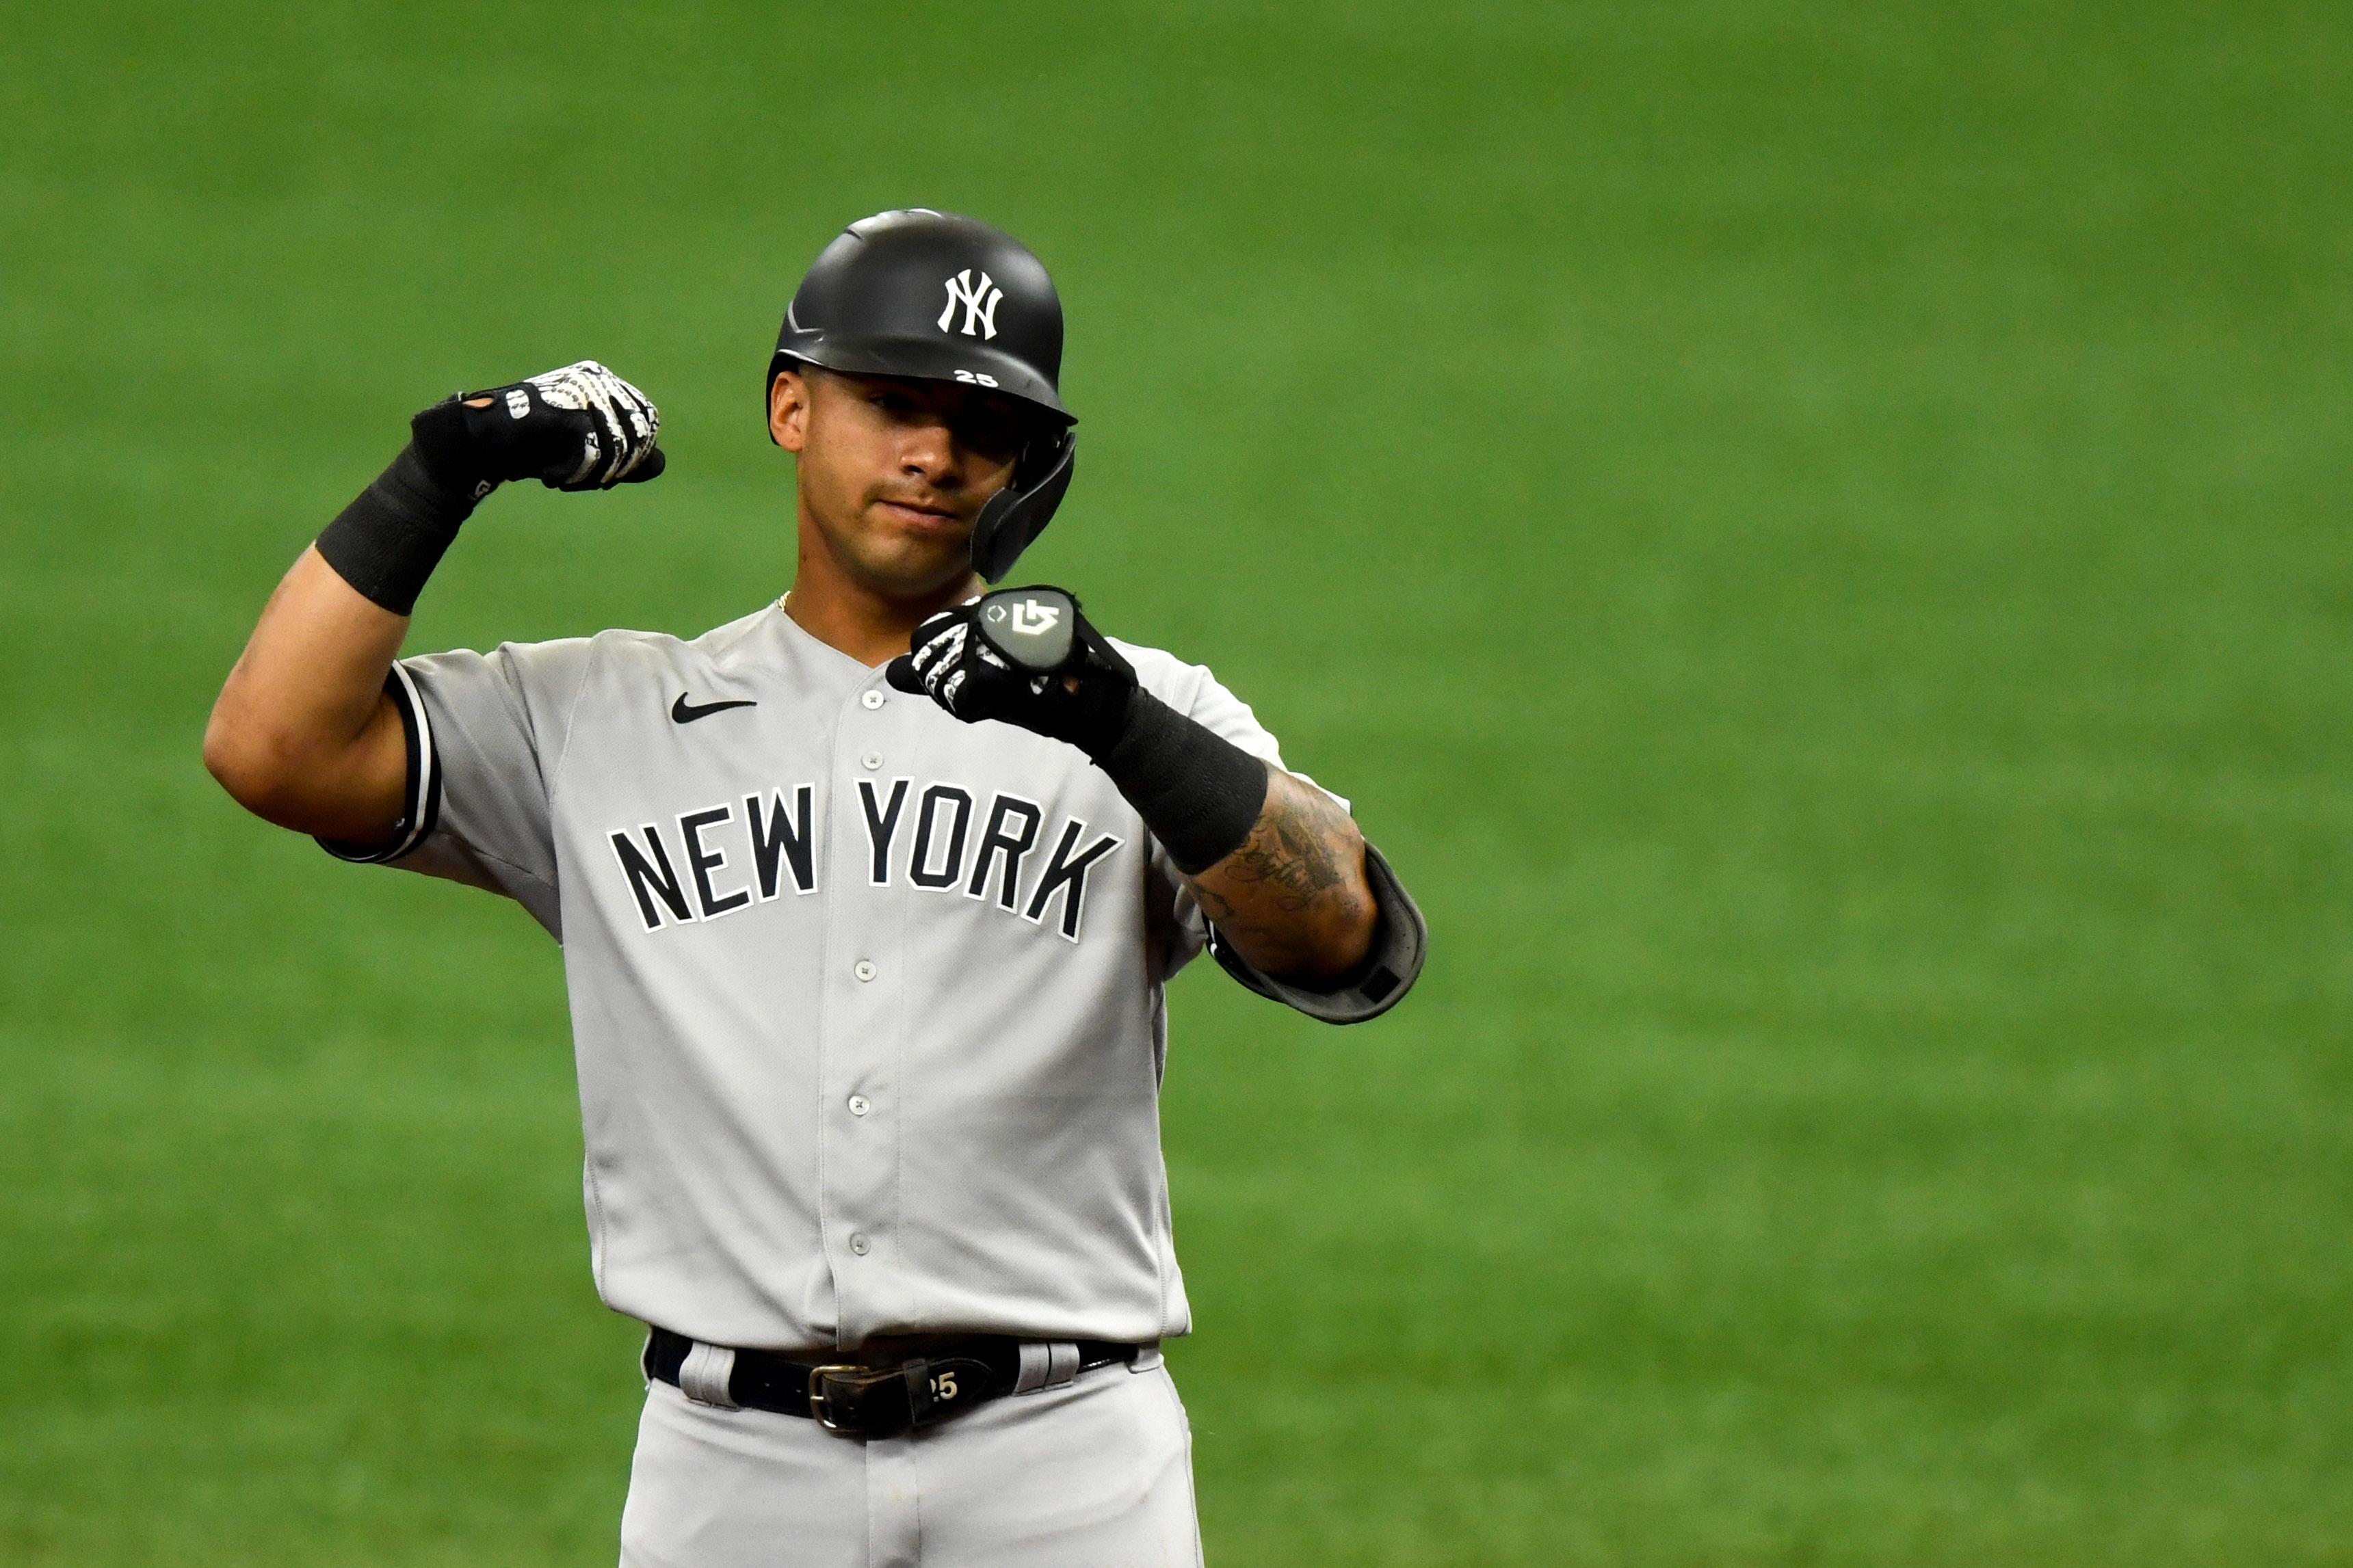 Aug 9, 2020; St. Petersburg, Florida, USA; New York Yankees second baseman Gleyber Torres (25) reacts after hitting a double during the fifth inning against the Tampa Bay Rays at Tropicana Field. Mandatory Credit: Douglas DeFelice-USA TODAY Sports / © Douglas DeFelice-USA TODAY Sports